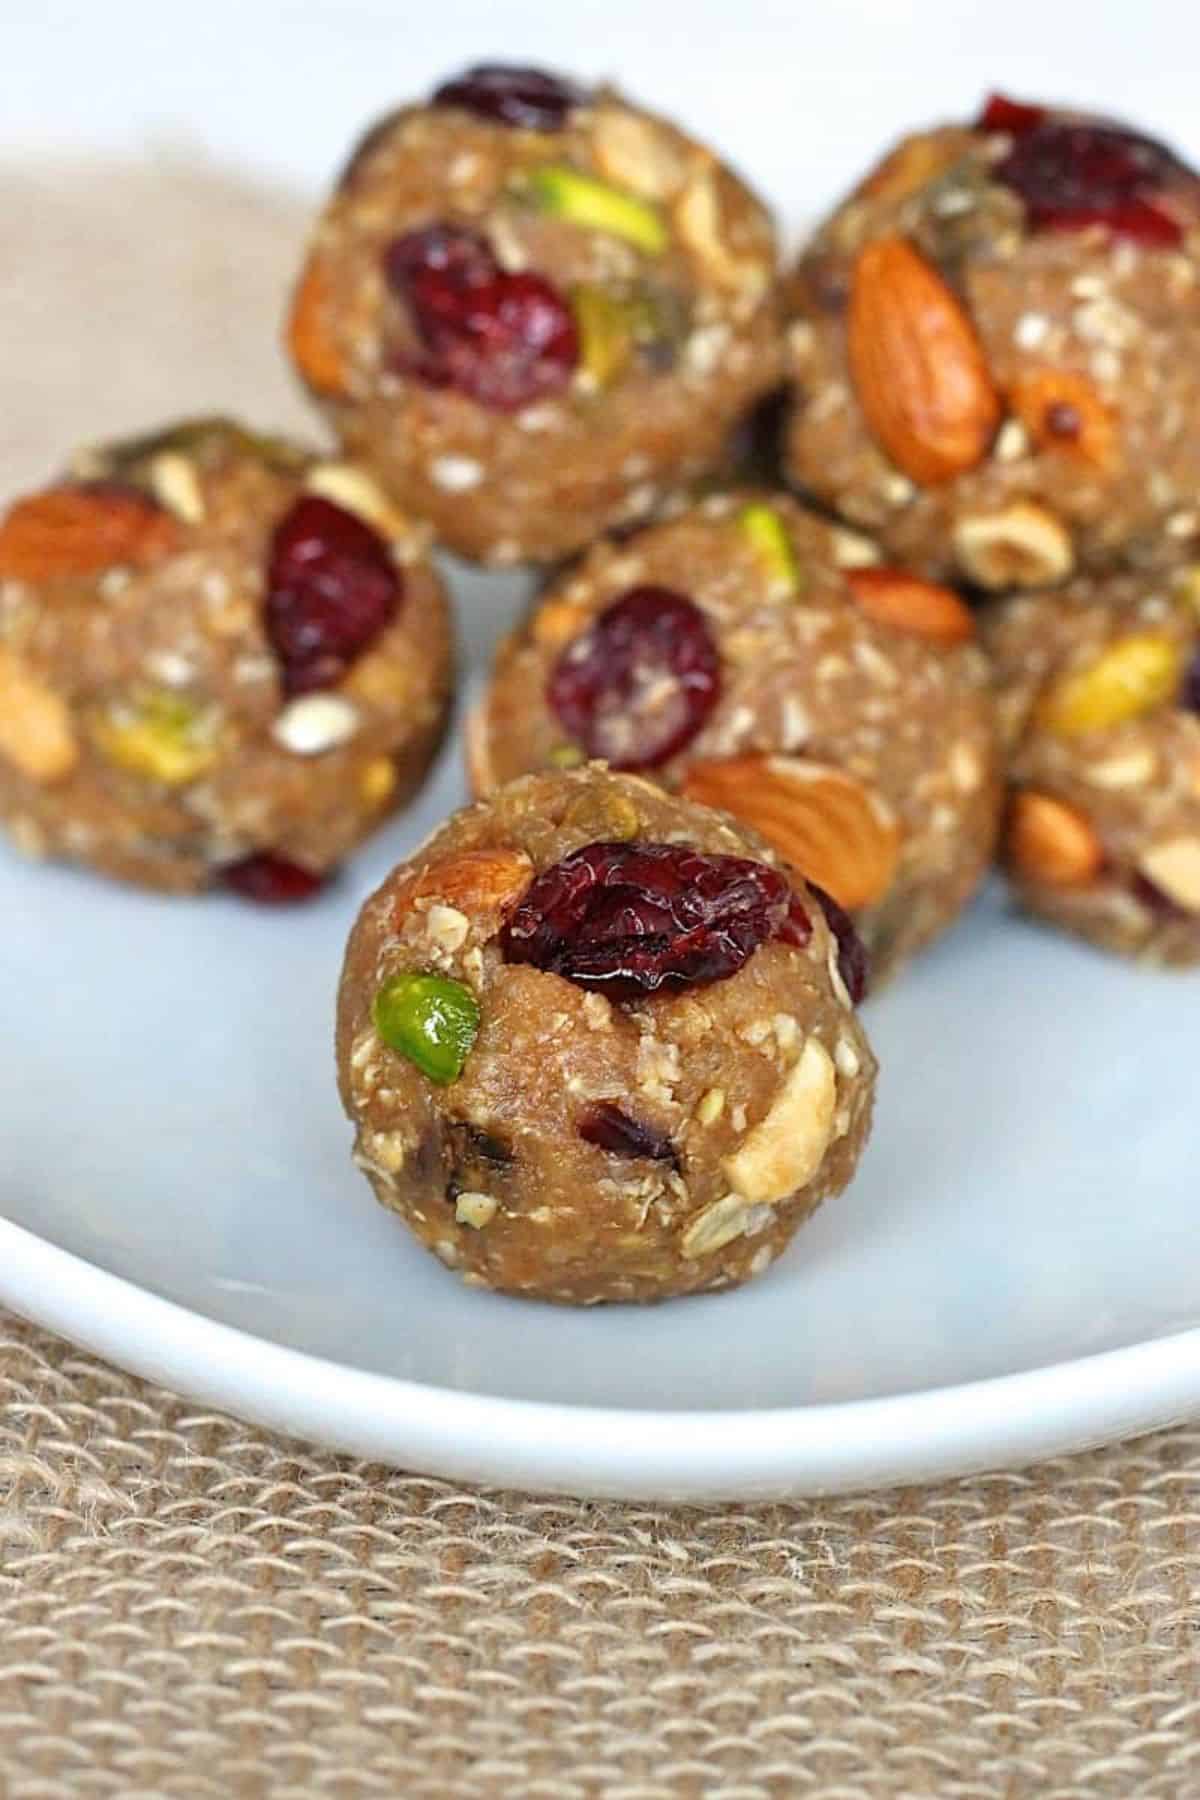 Delicious trail mix quinoa energy bites on a plate.